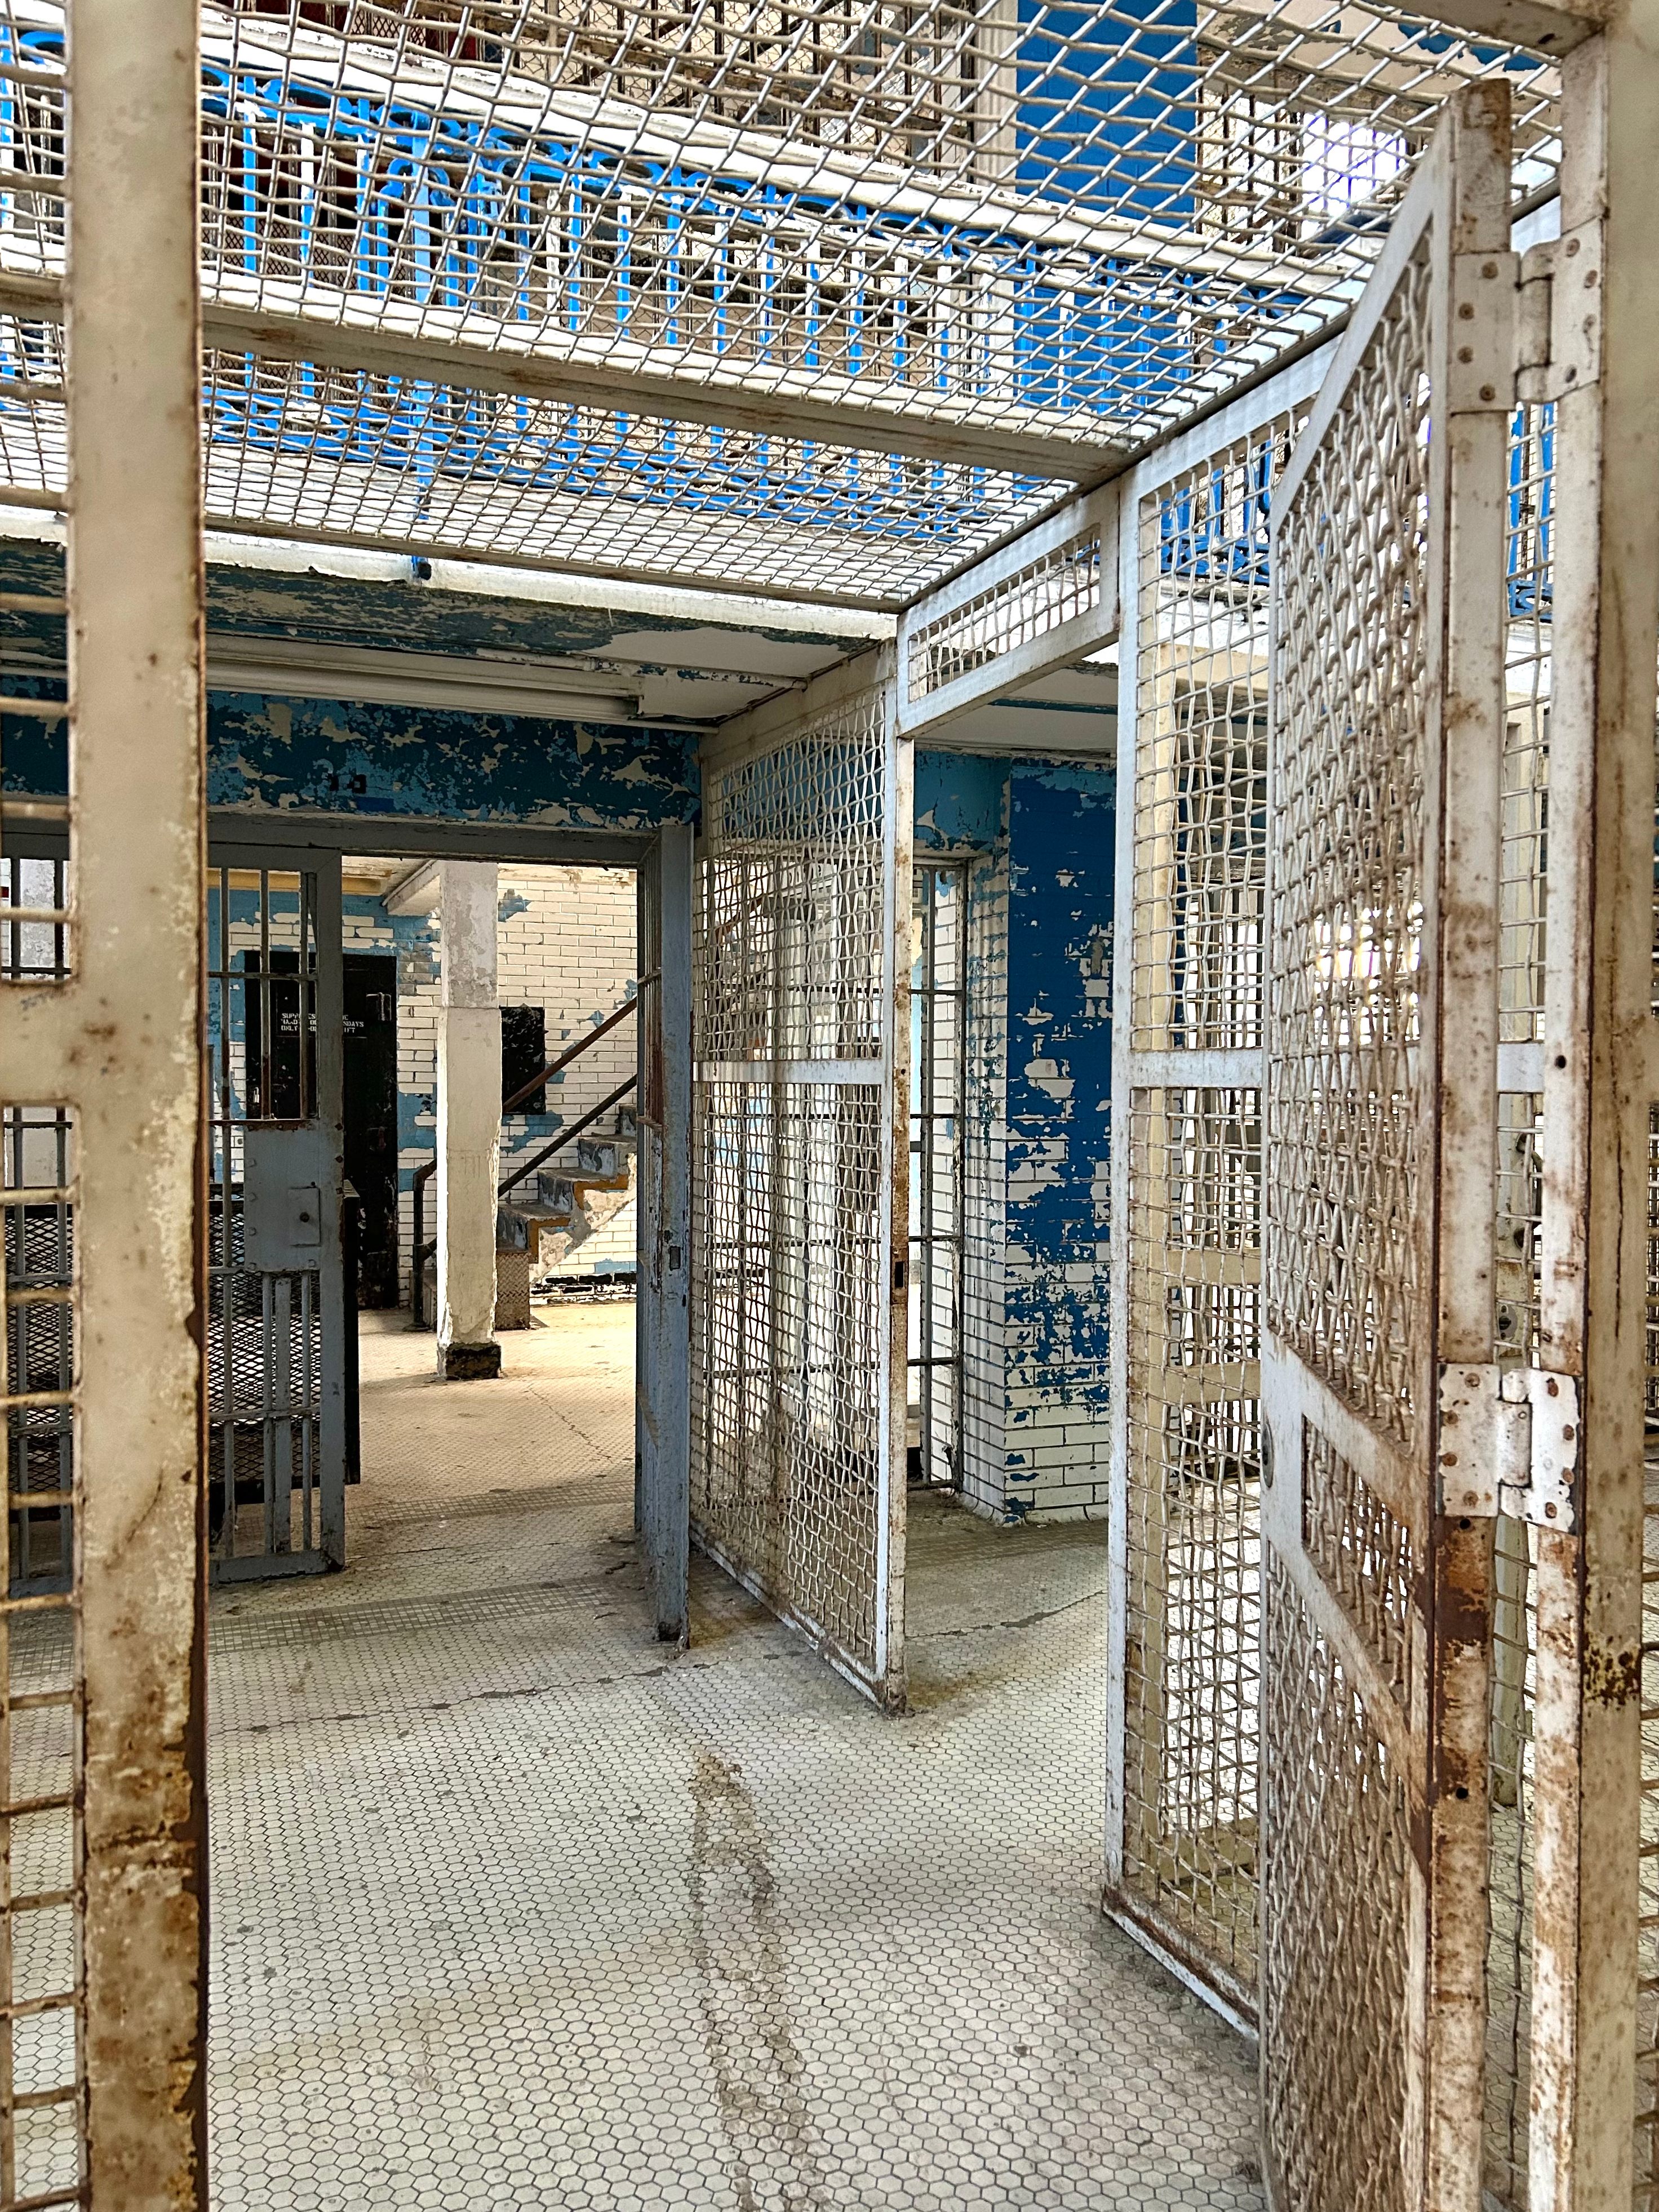 Extra protective caging was installed in Housing Unit 3 following the inmate riot of 1954.